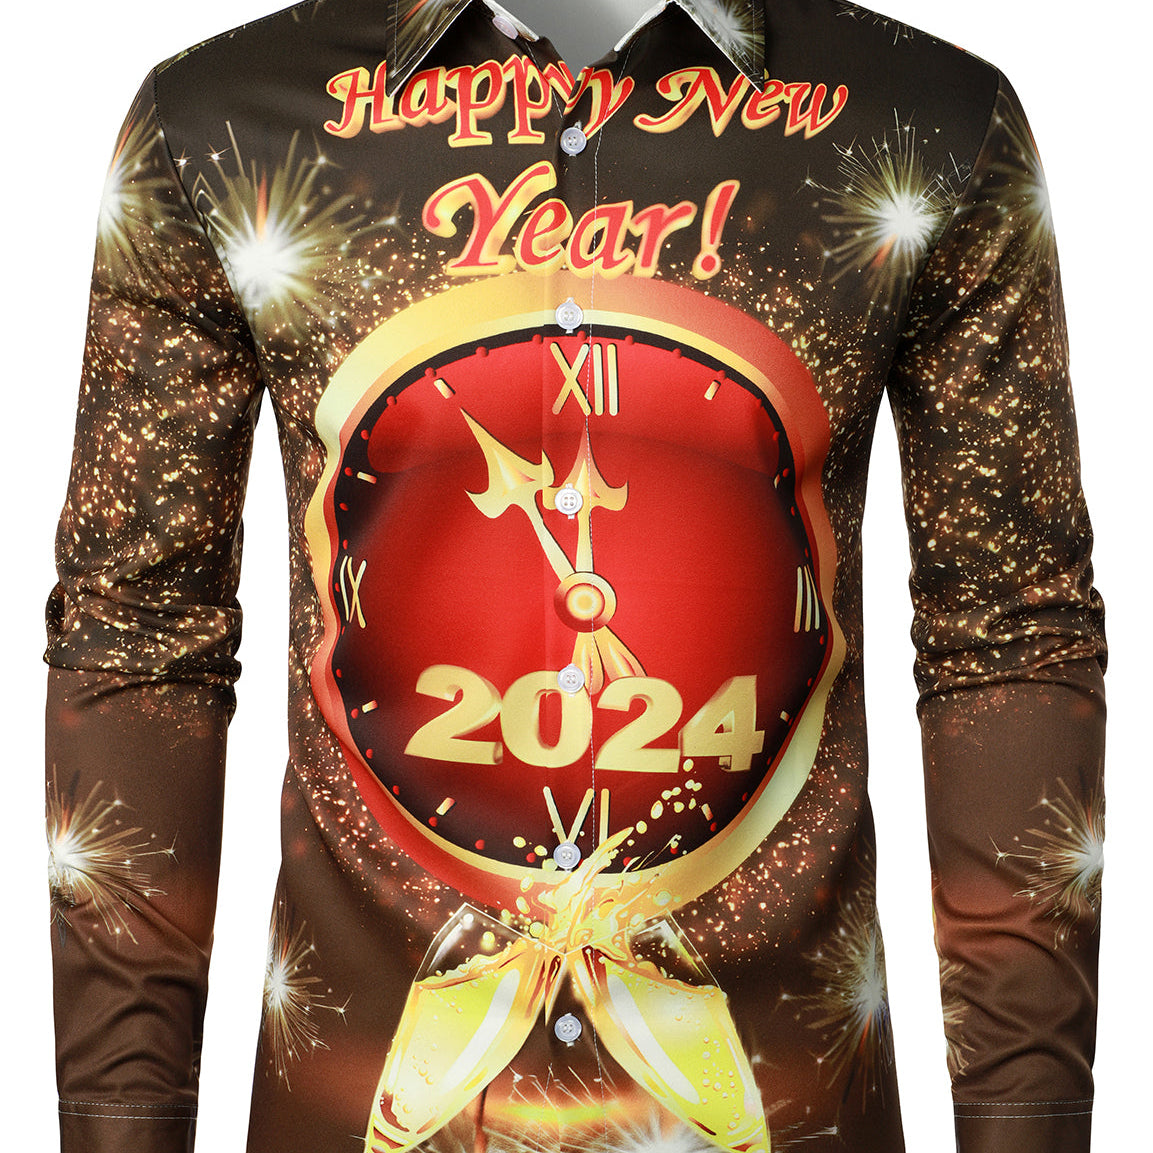 Men's Happy New Year Eve Funny Countdown Clock 2024 Button Up Long Sleeve Shirt